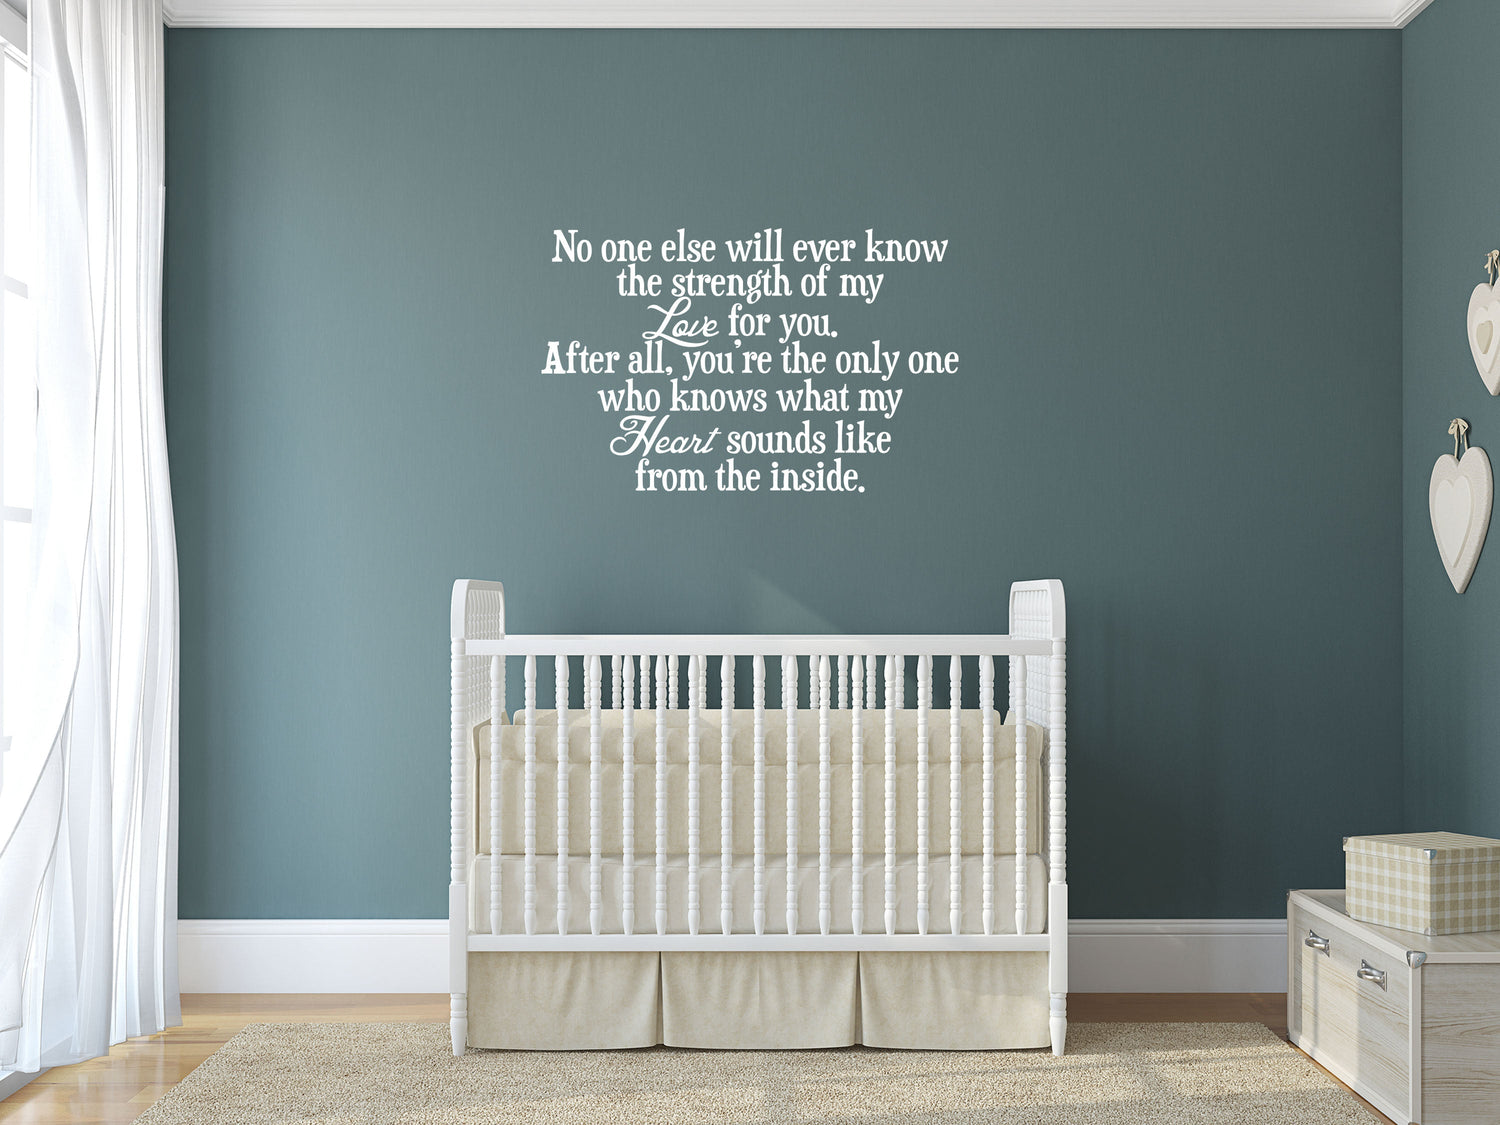 No One Else Will Ever Know The Strength Of My Love For You - Inspirational Wall Decals Vinyl Wall Decal Inspirational Wall Signs 